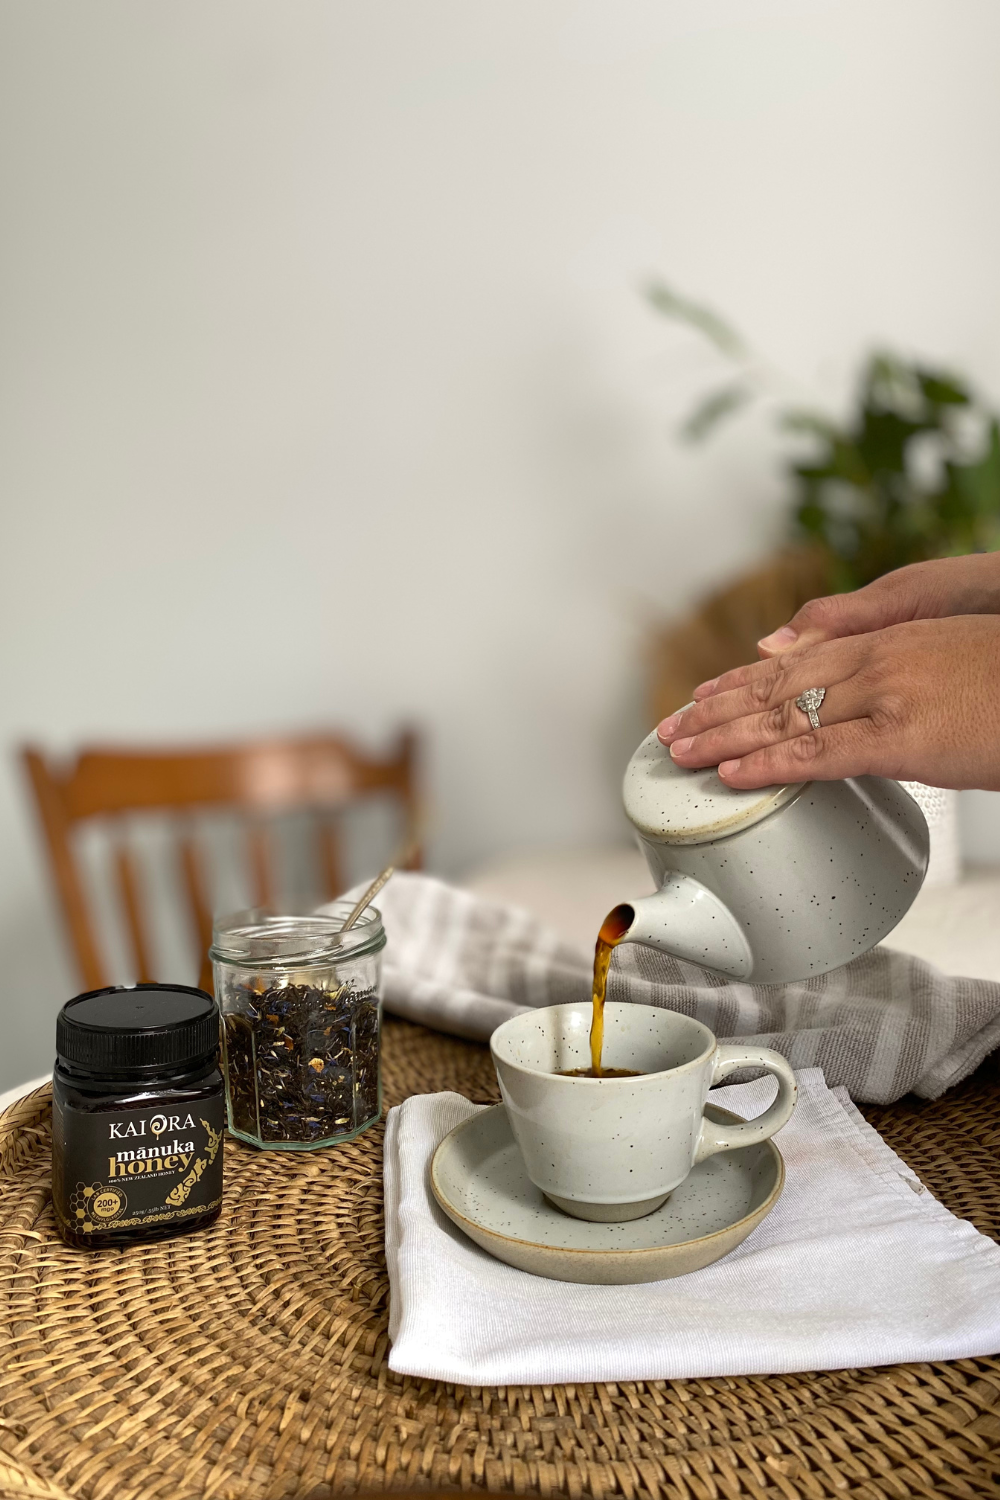 Can you add manuka honey to hot drinks?